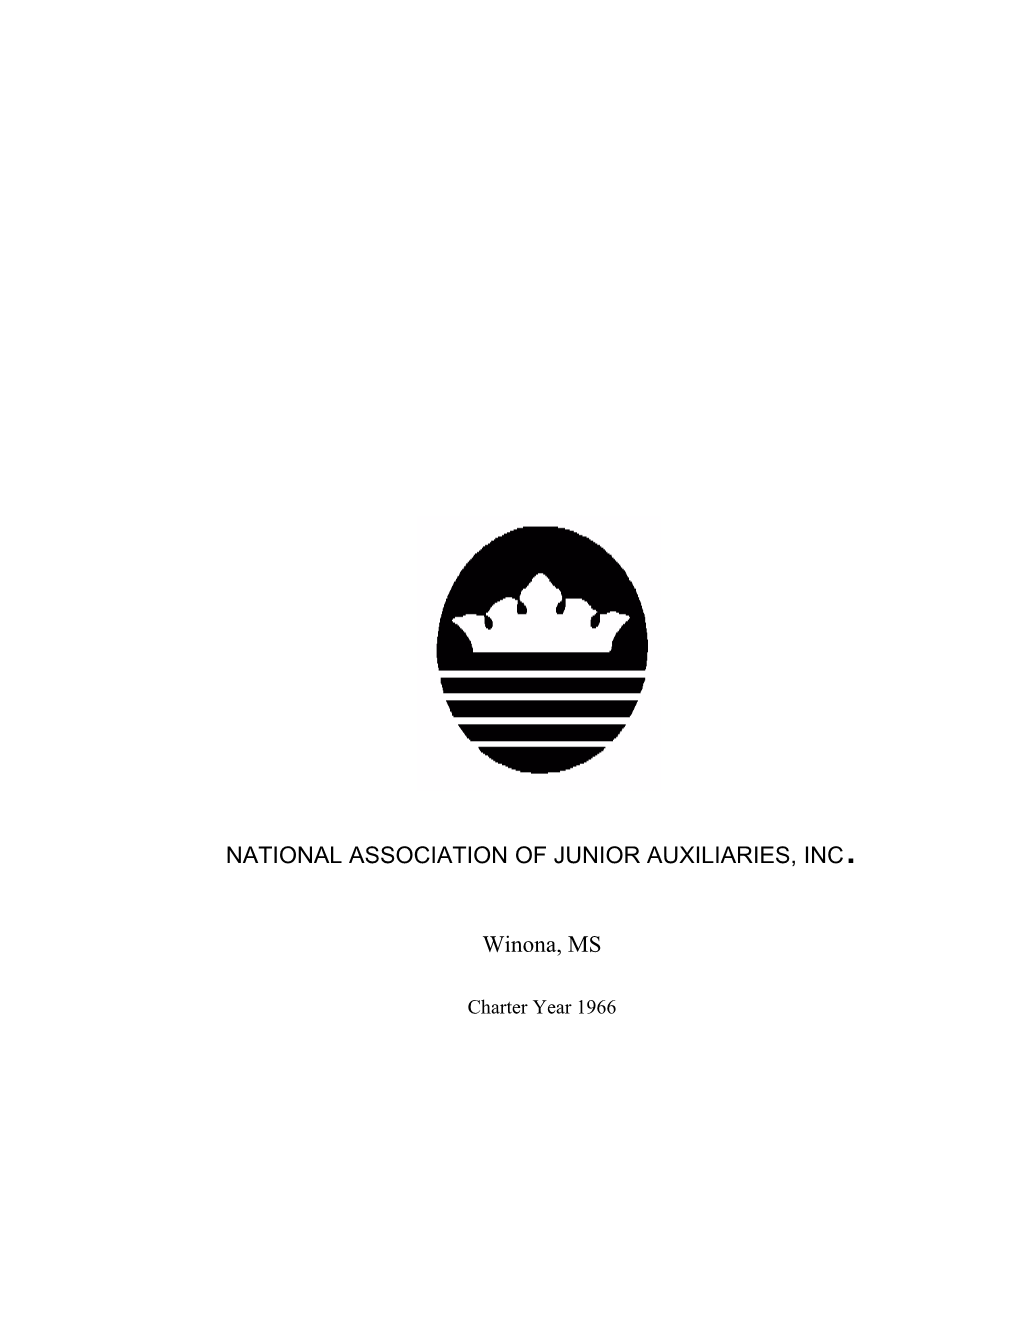 National Association of Junior Auxiliaries, Inc